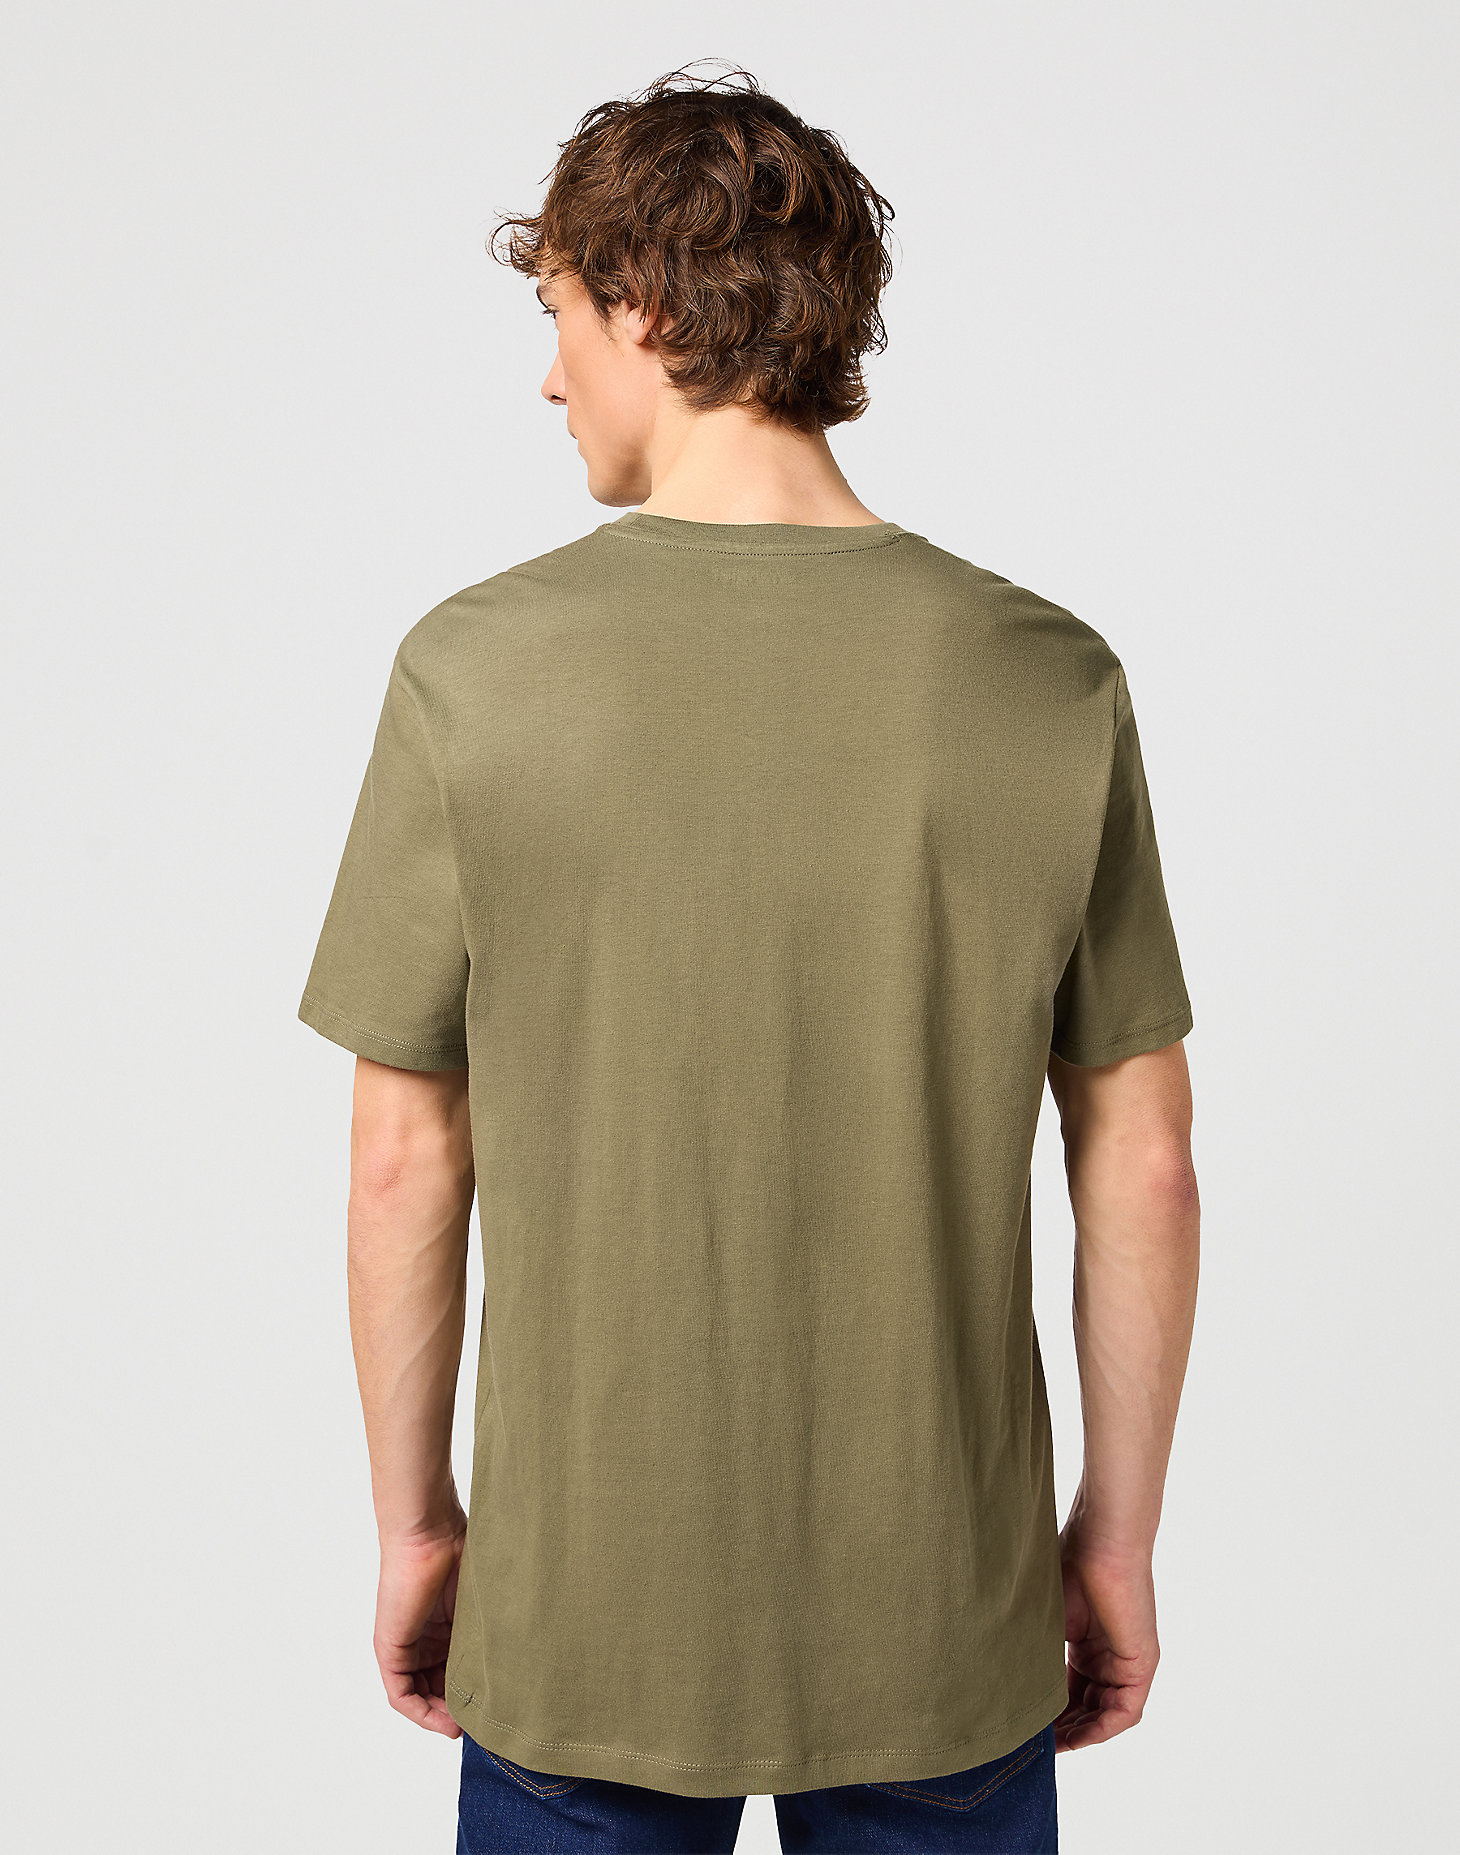 2 Pack Tee in Dusty Olive alternative view 2